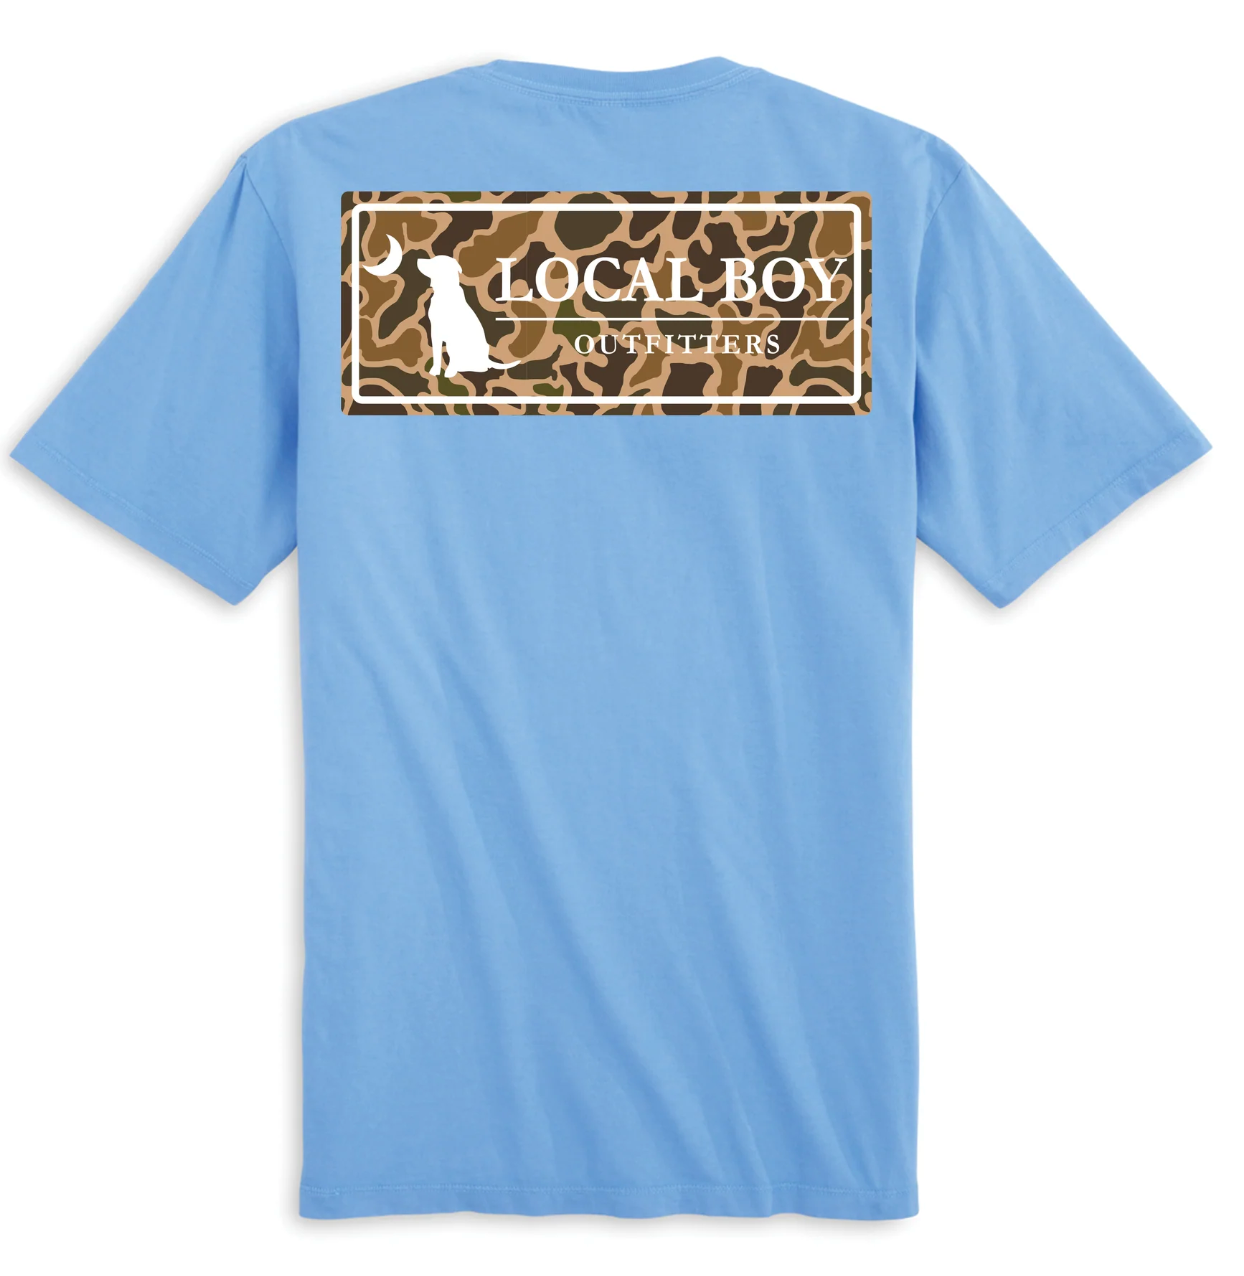 Local Boy Youth Old School Plate T-Shirt